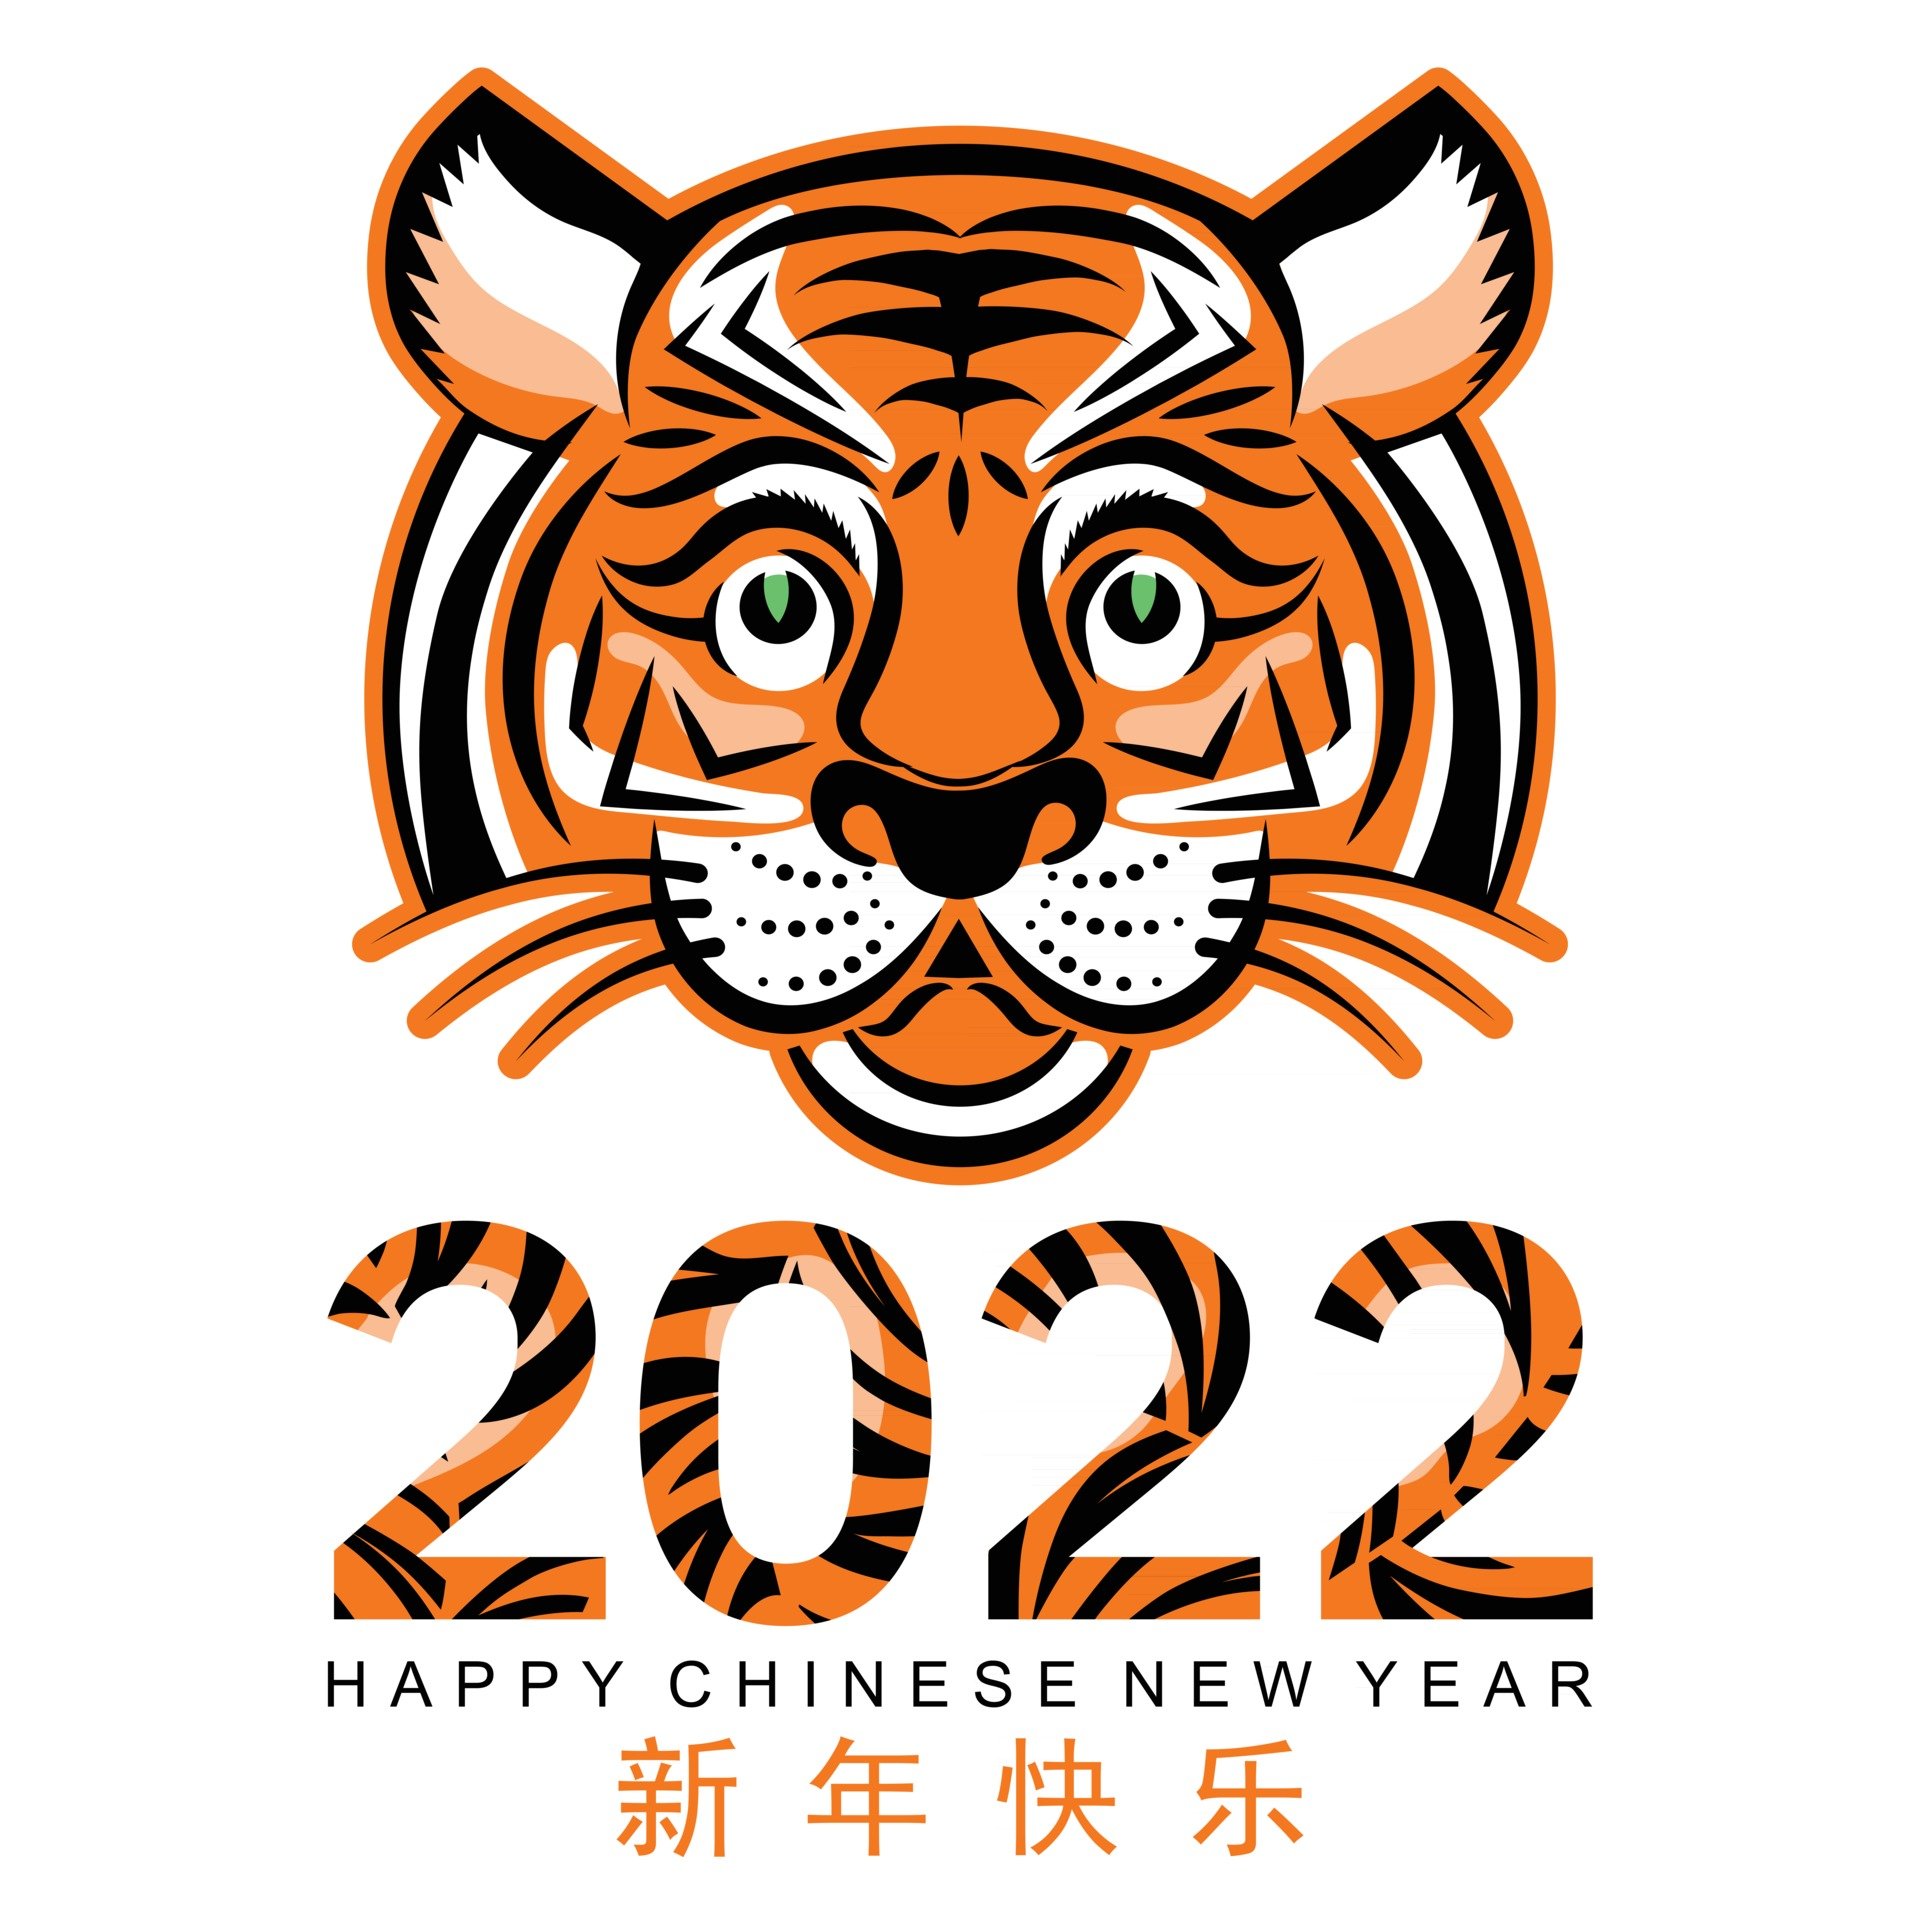 chinese-new-year-2022-year-of-the-tiger-vector.jpg